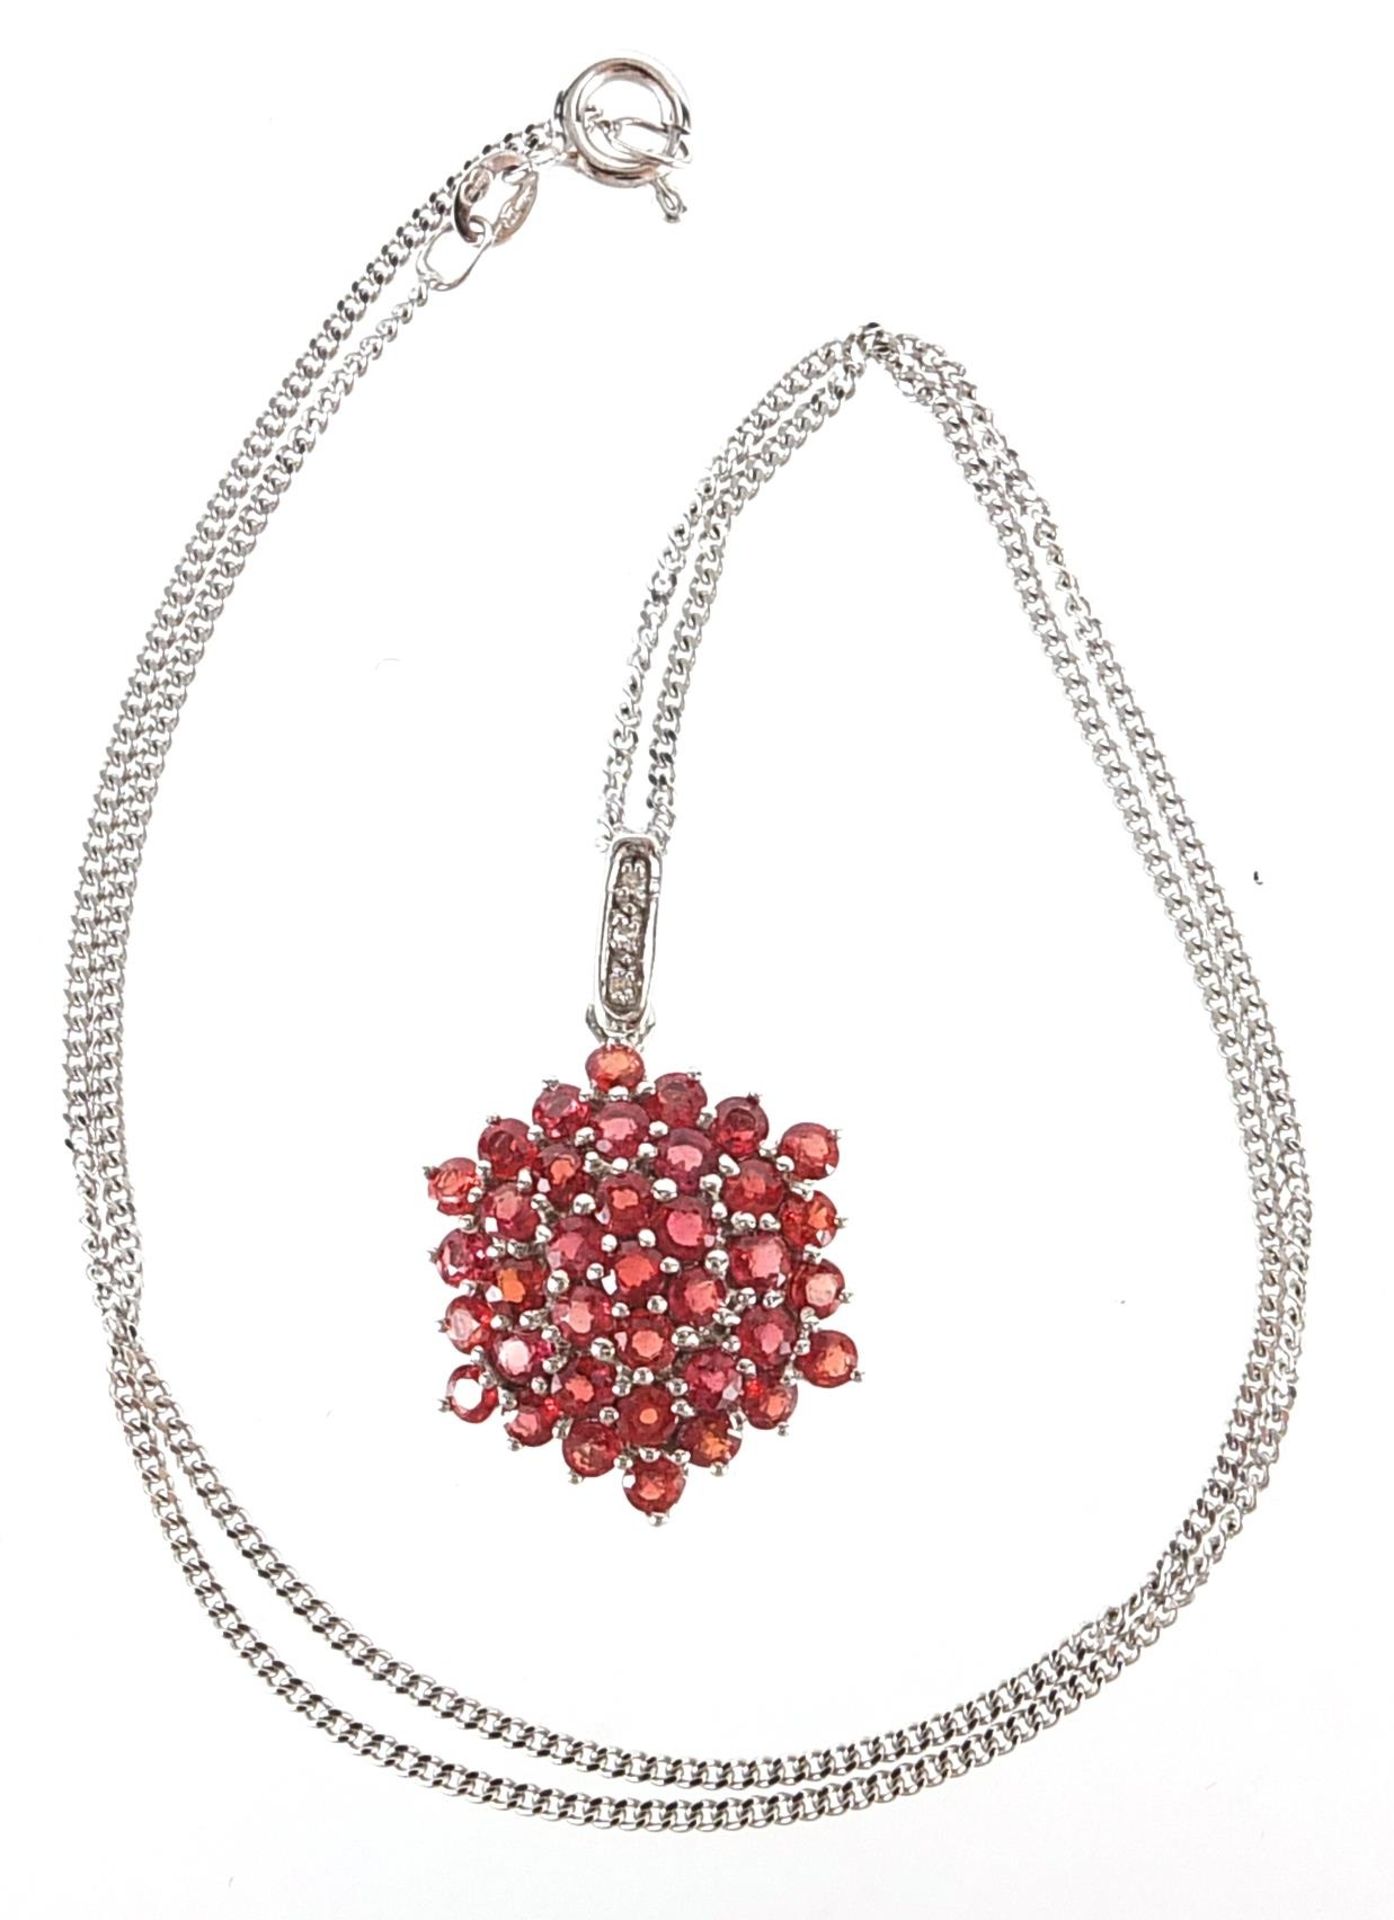 9ct white gold garnet and diamond cluster pendant on a 9ct white gold necklace, 2.9cm high and - Image 2 of 3